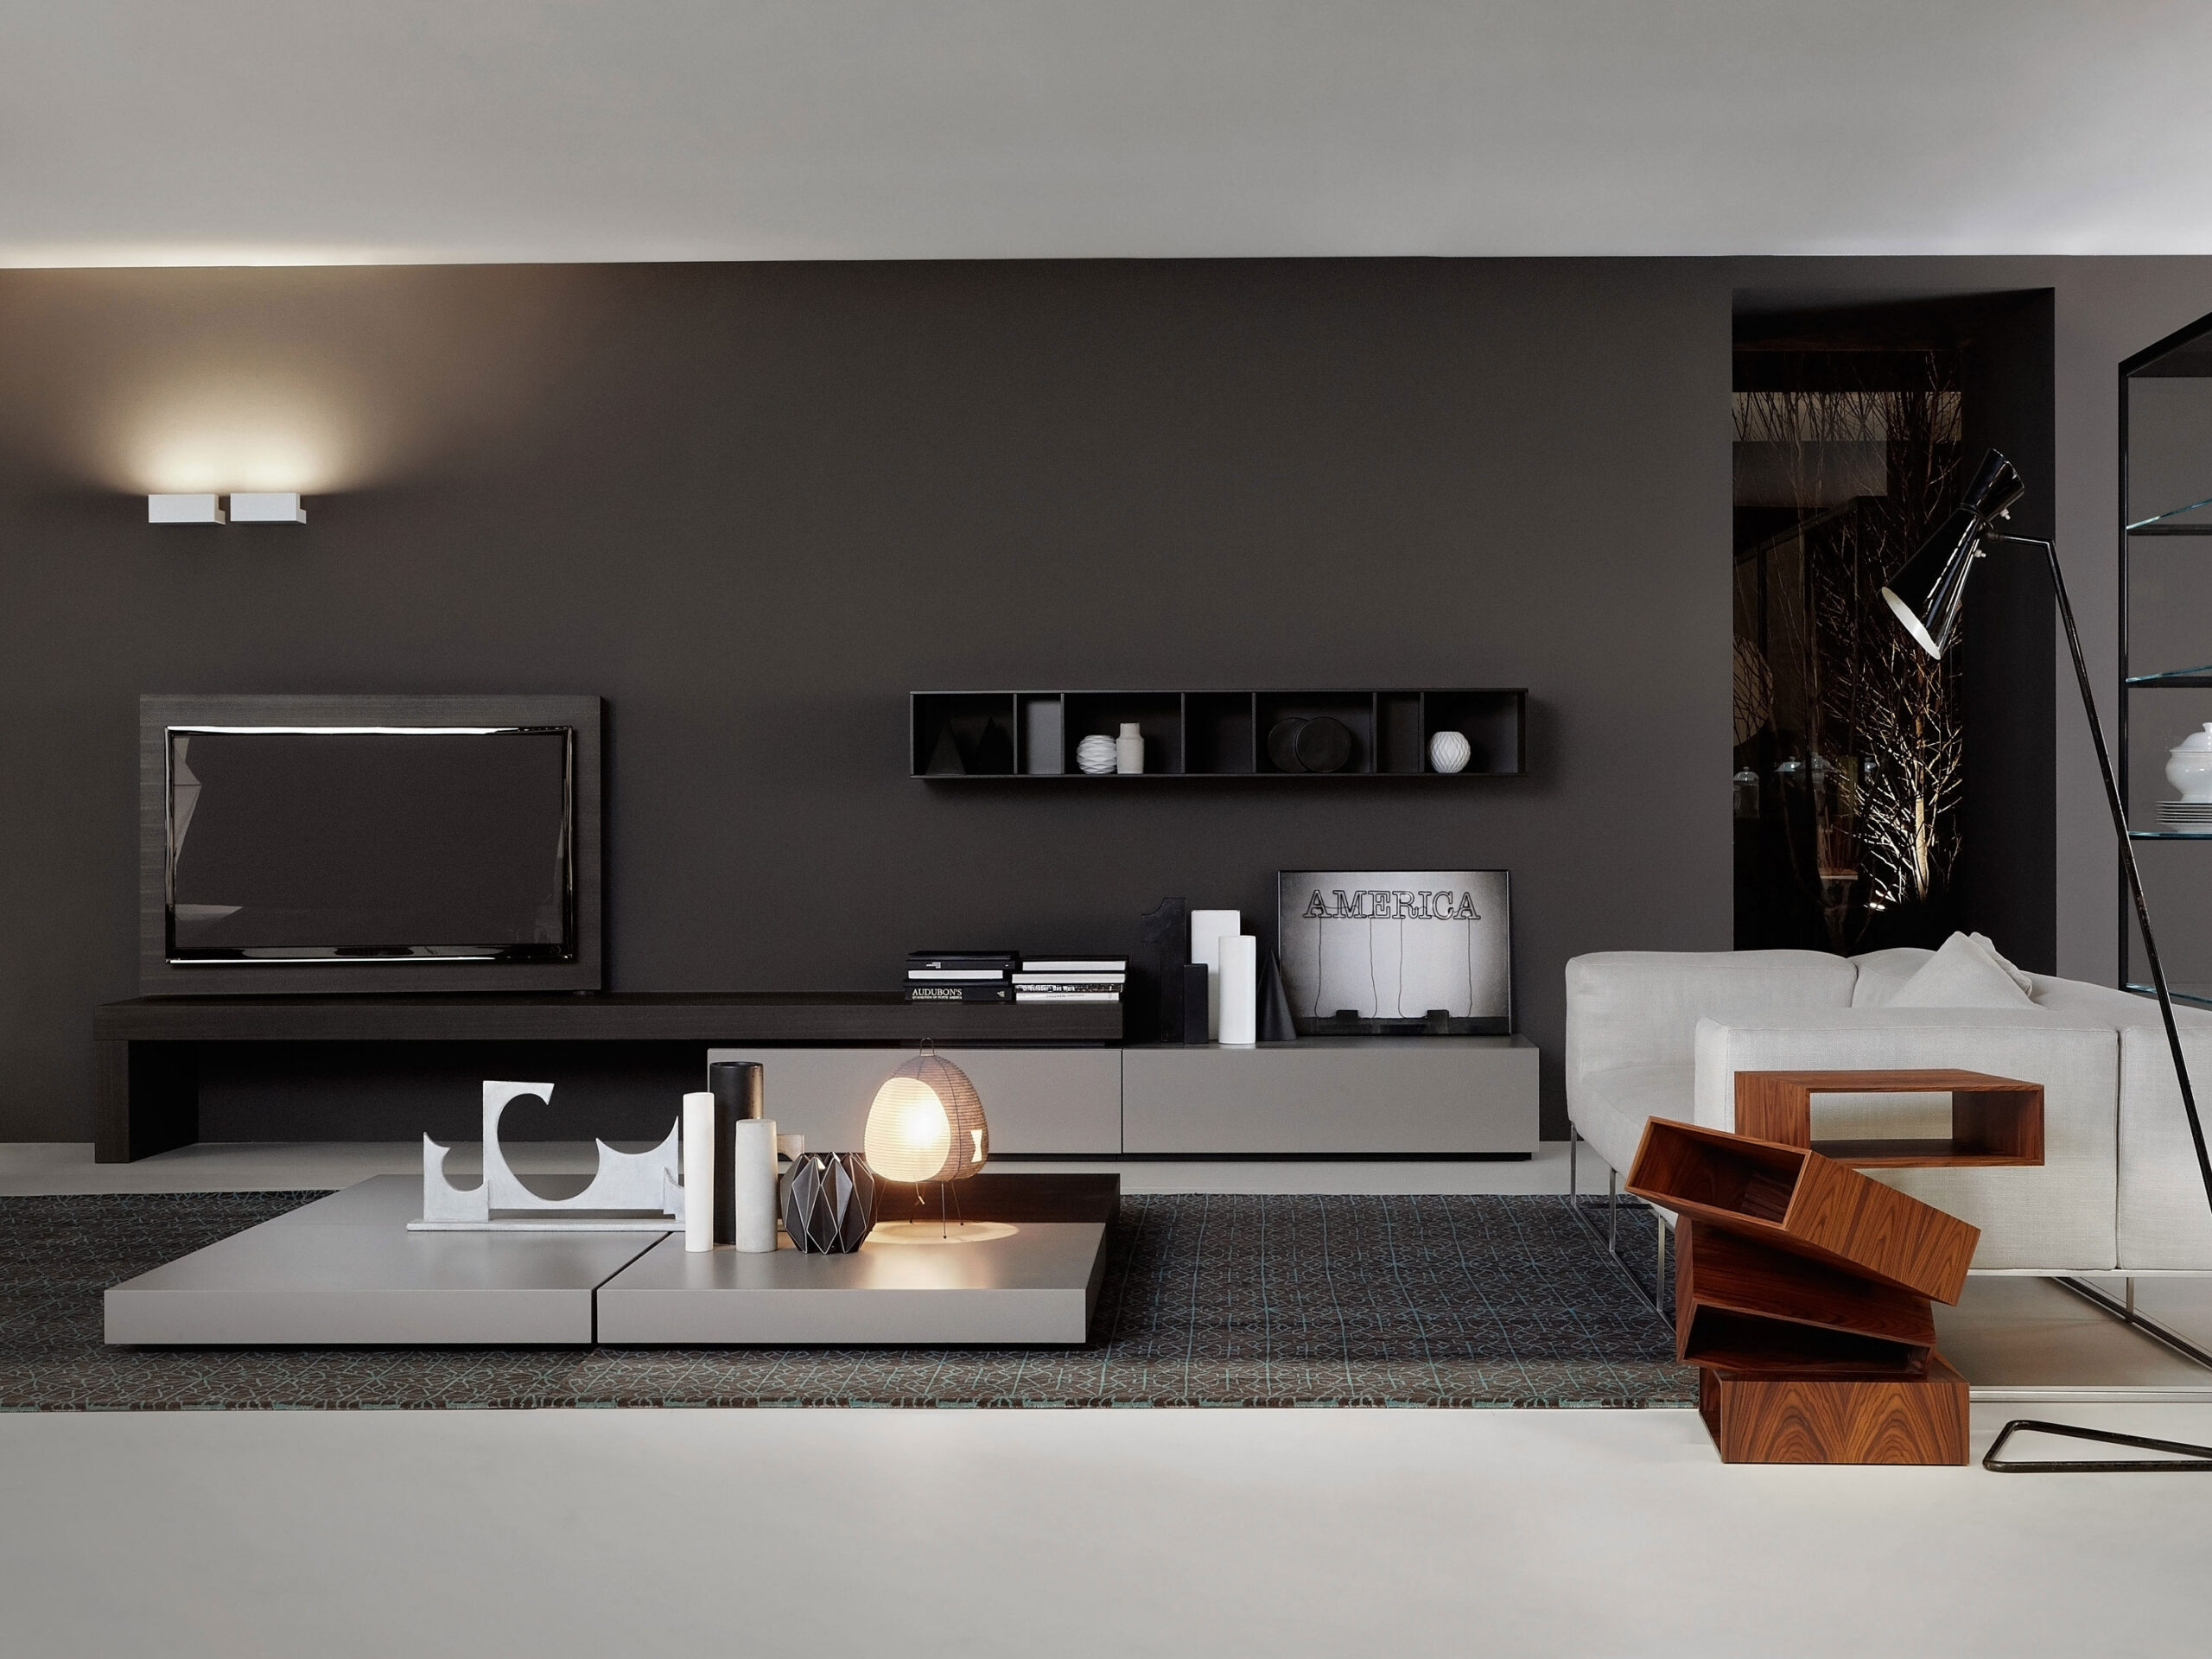 TV furniture - not only practical, but also design-oriented